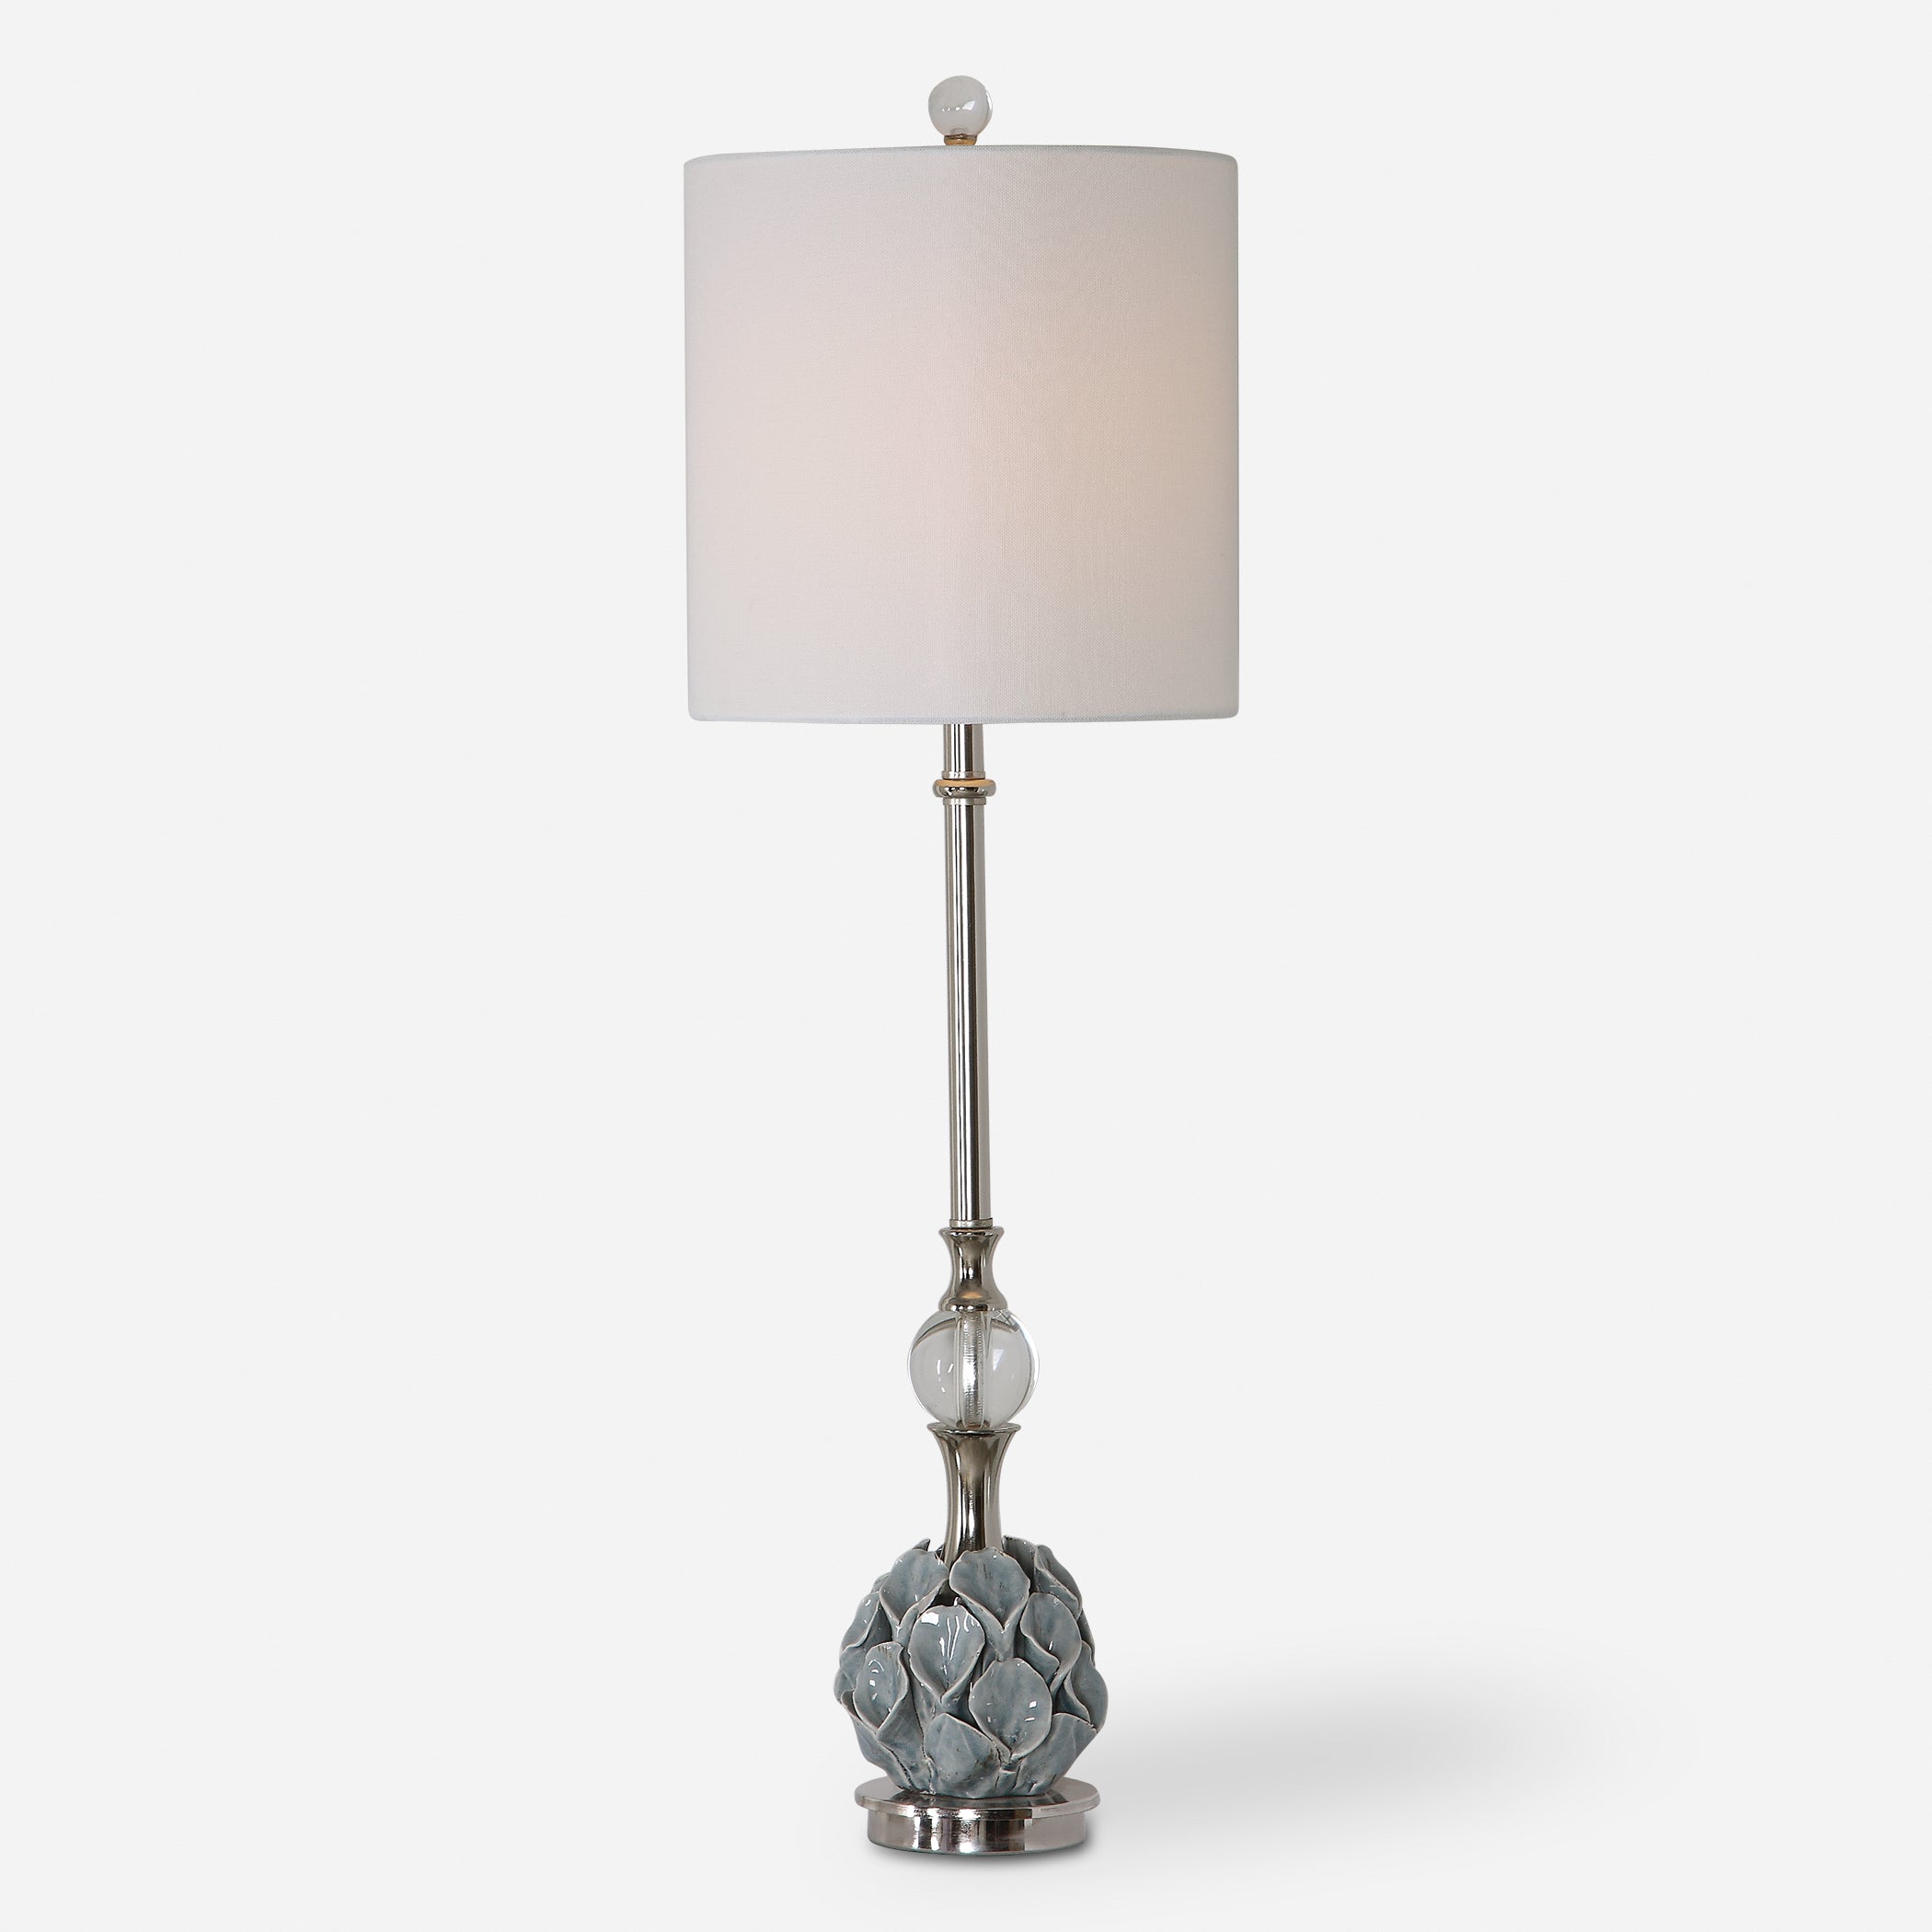 Uttermost Elody Blue Gray Table Lamp Blue Gray Table Lamp Uttermost   